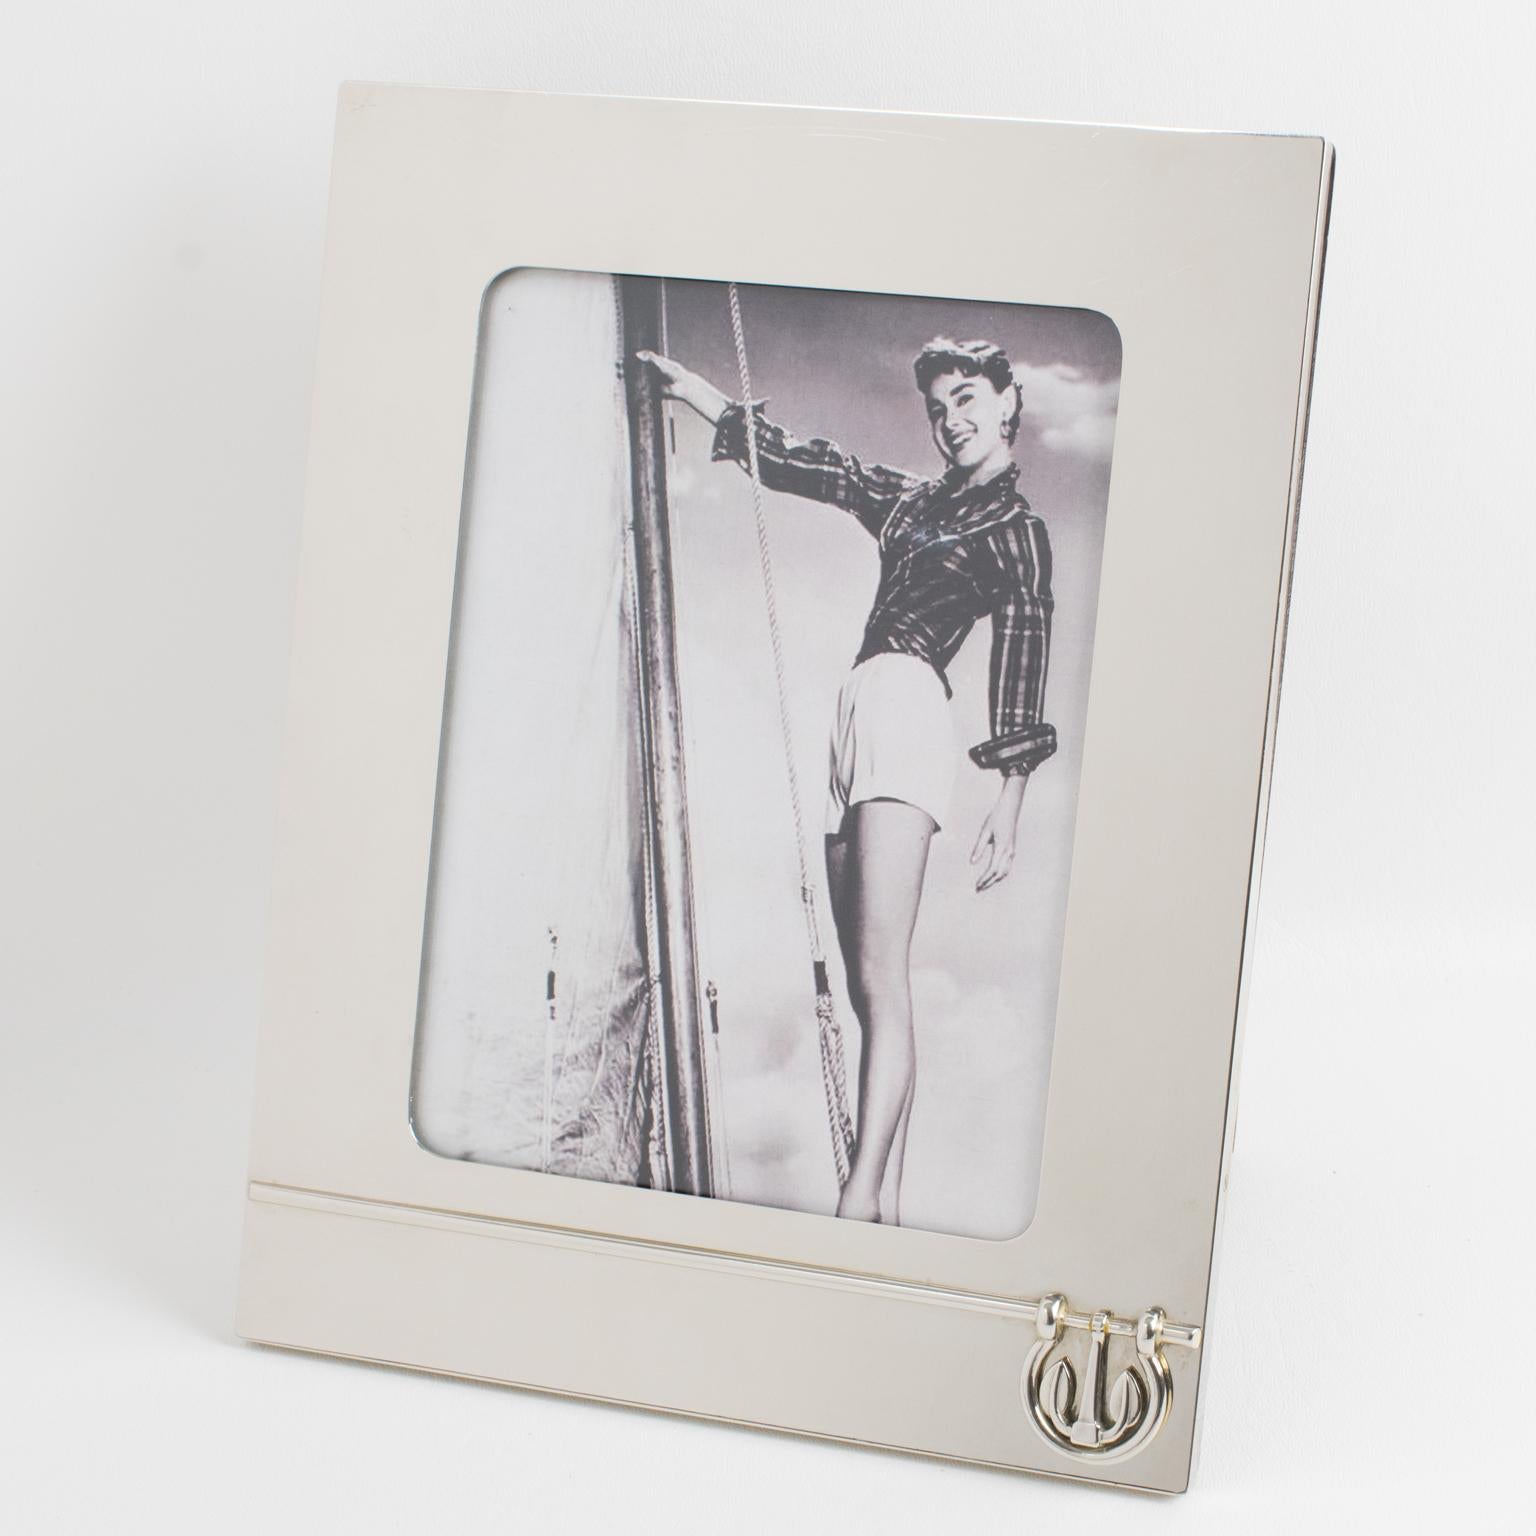 A sophisticated picture photo frame crafted by Italian designer Gucci. The piece boasts a chromed metal framing with a nautical design featuring an anchor and boat fittings. The back and easel are made of high-gloss walnut wood. The frame is marked